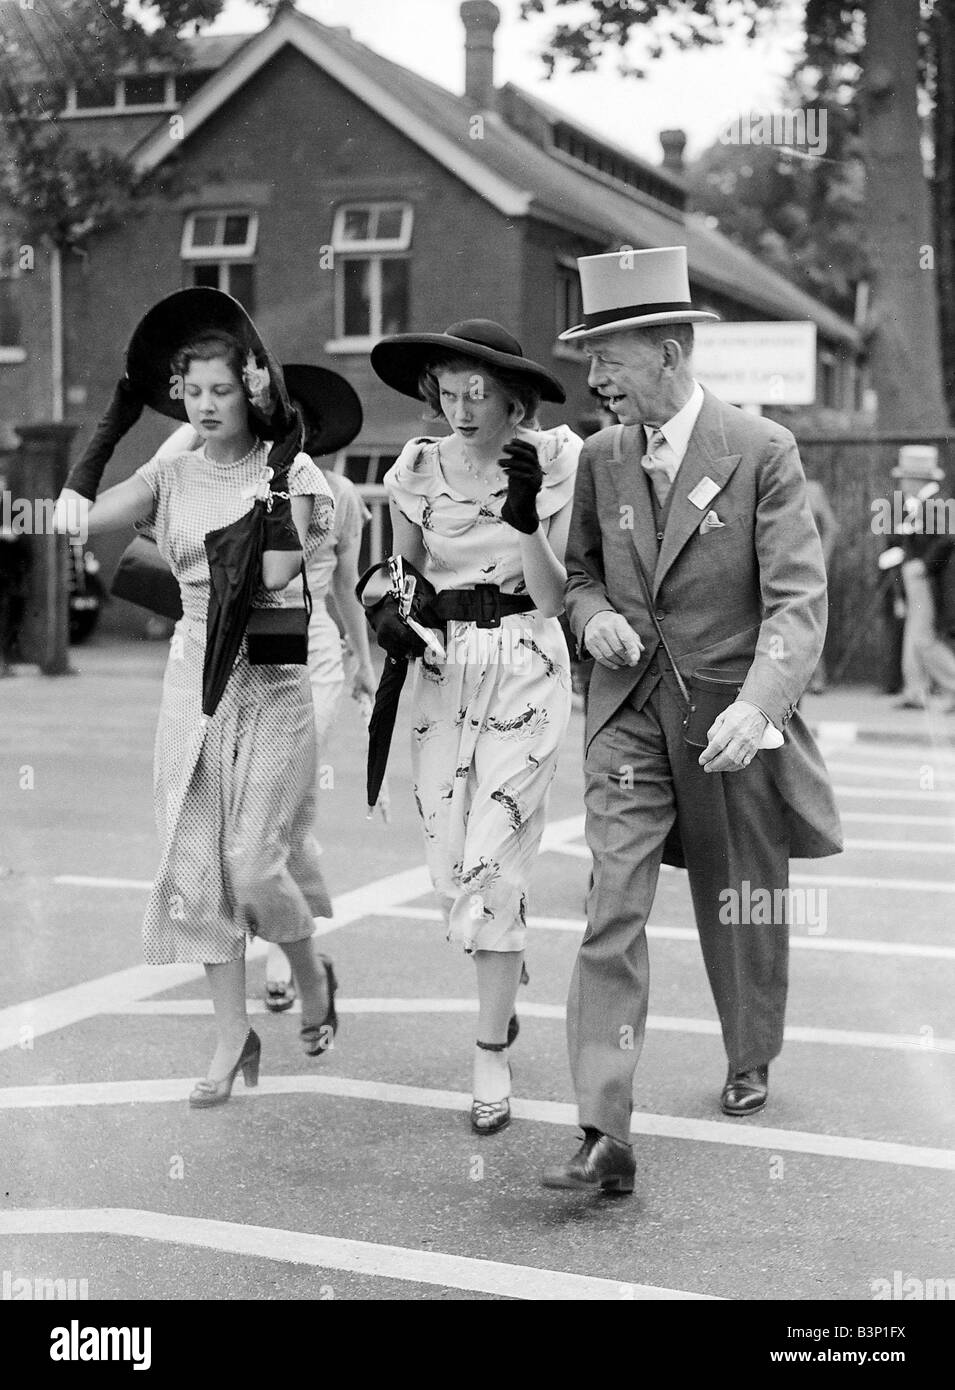 1950 Clothing Ascot Fashion Crossing the road holding onto their hats ...